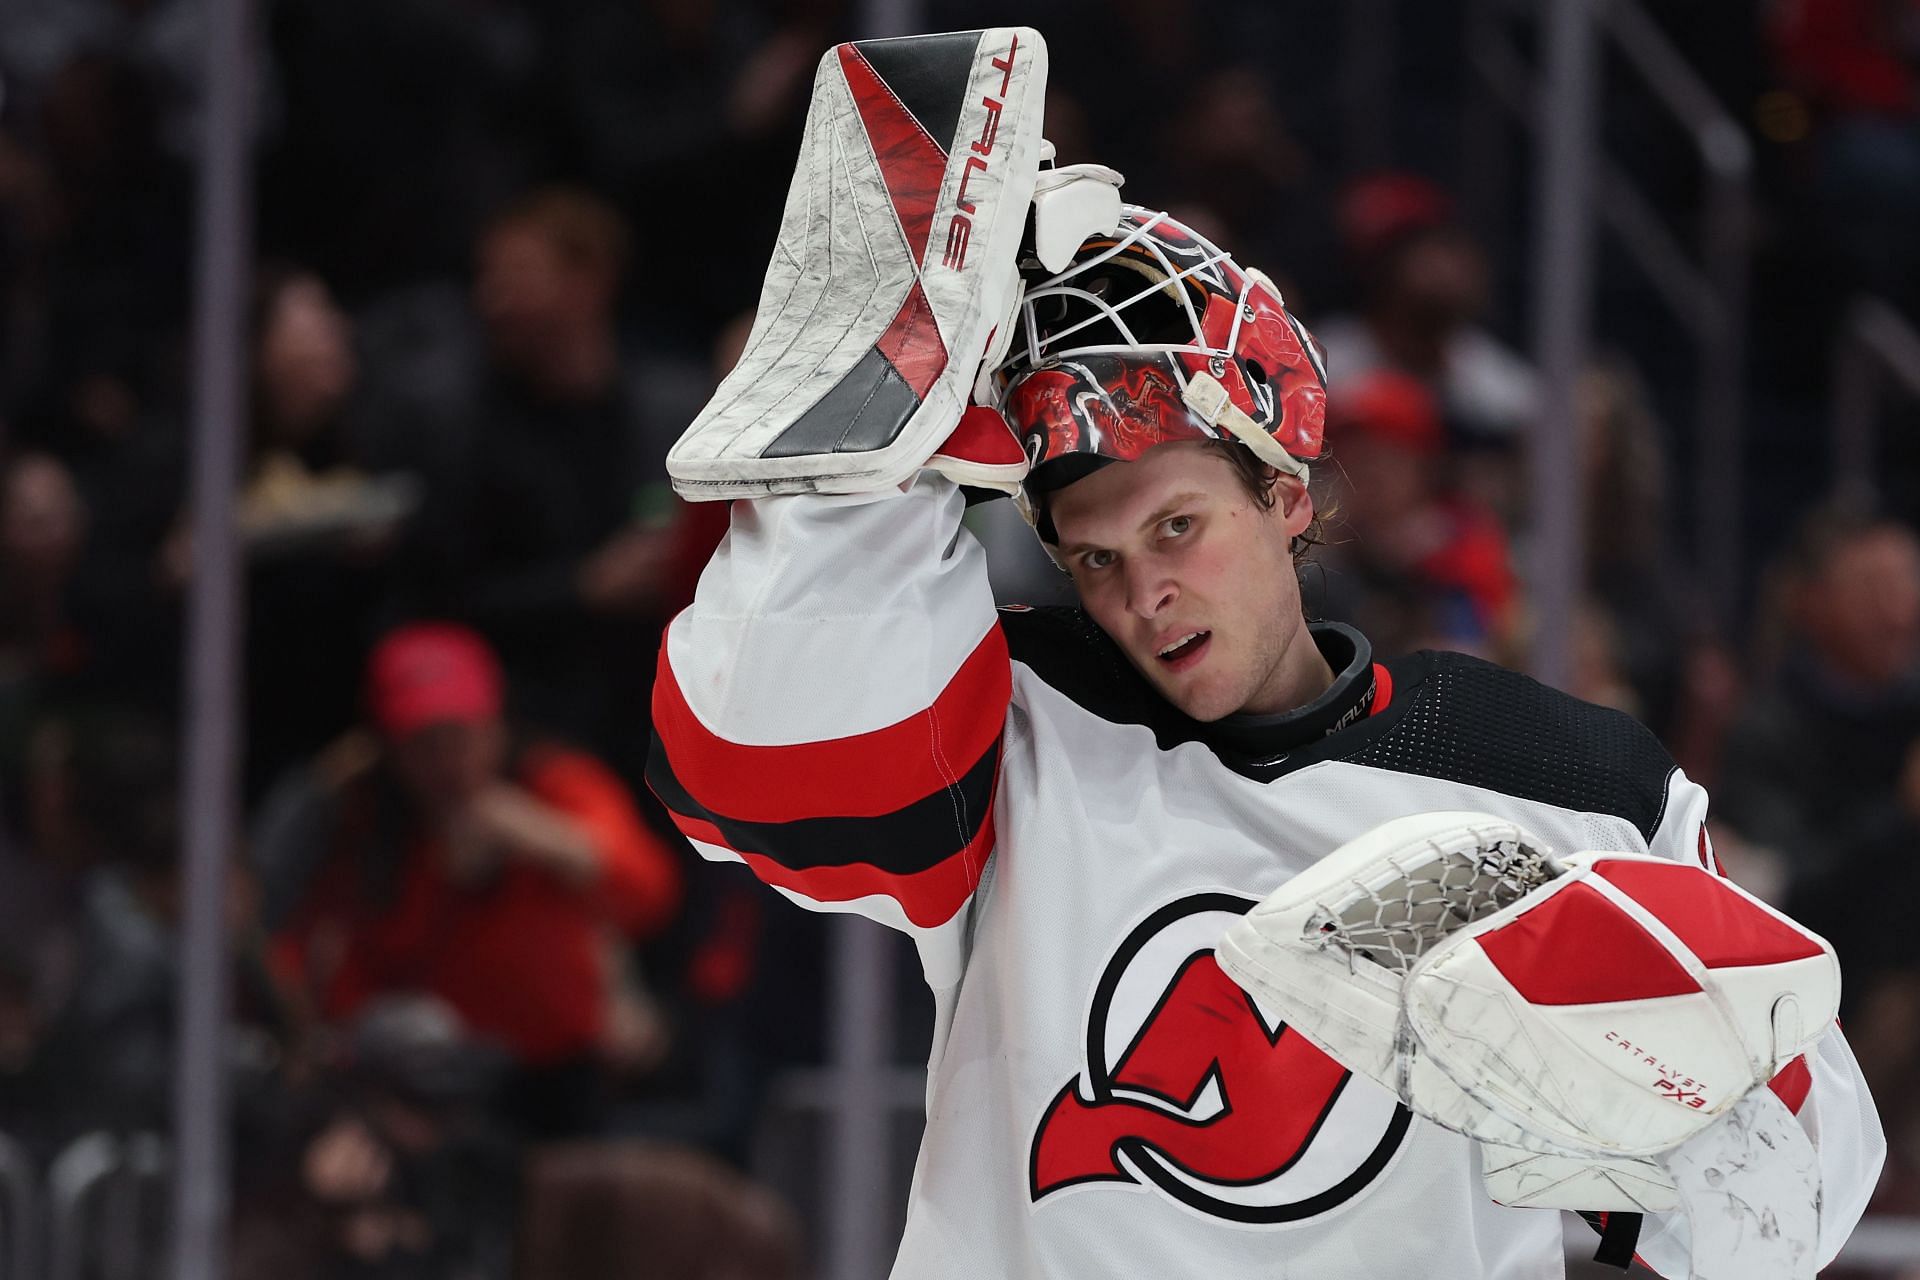 New Jersey Devils call up Rookie Before Sunday Clash with Caps